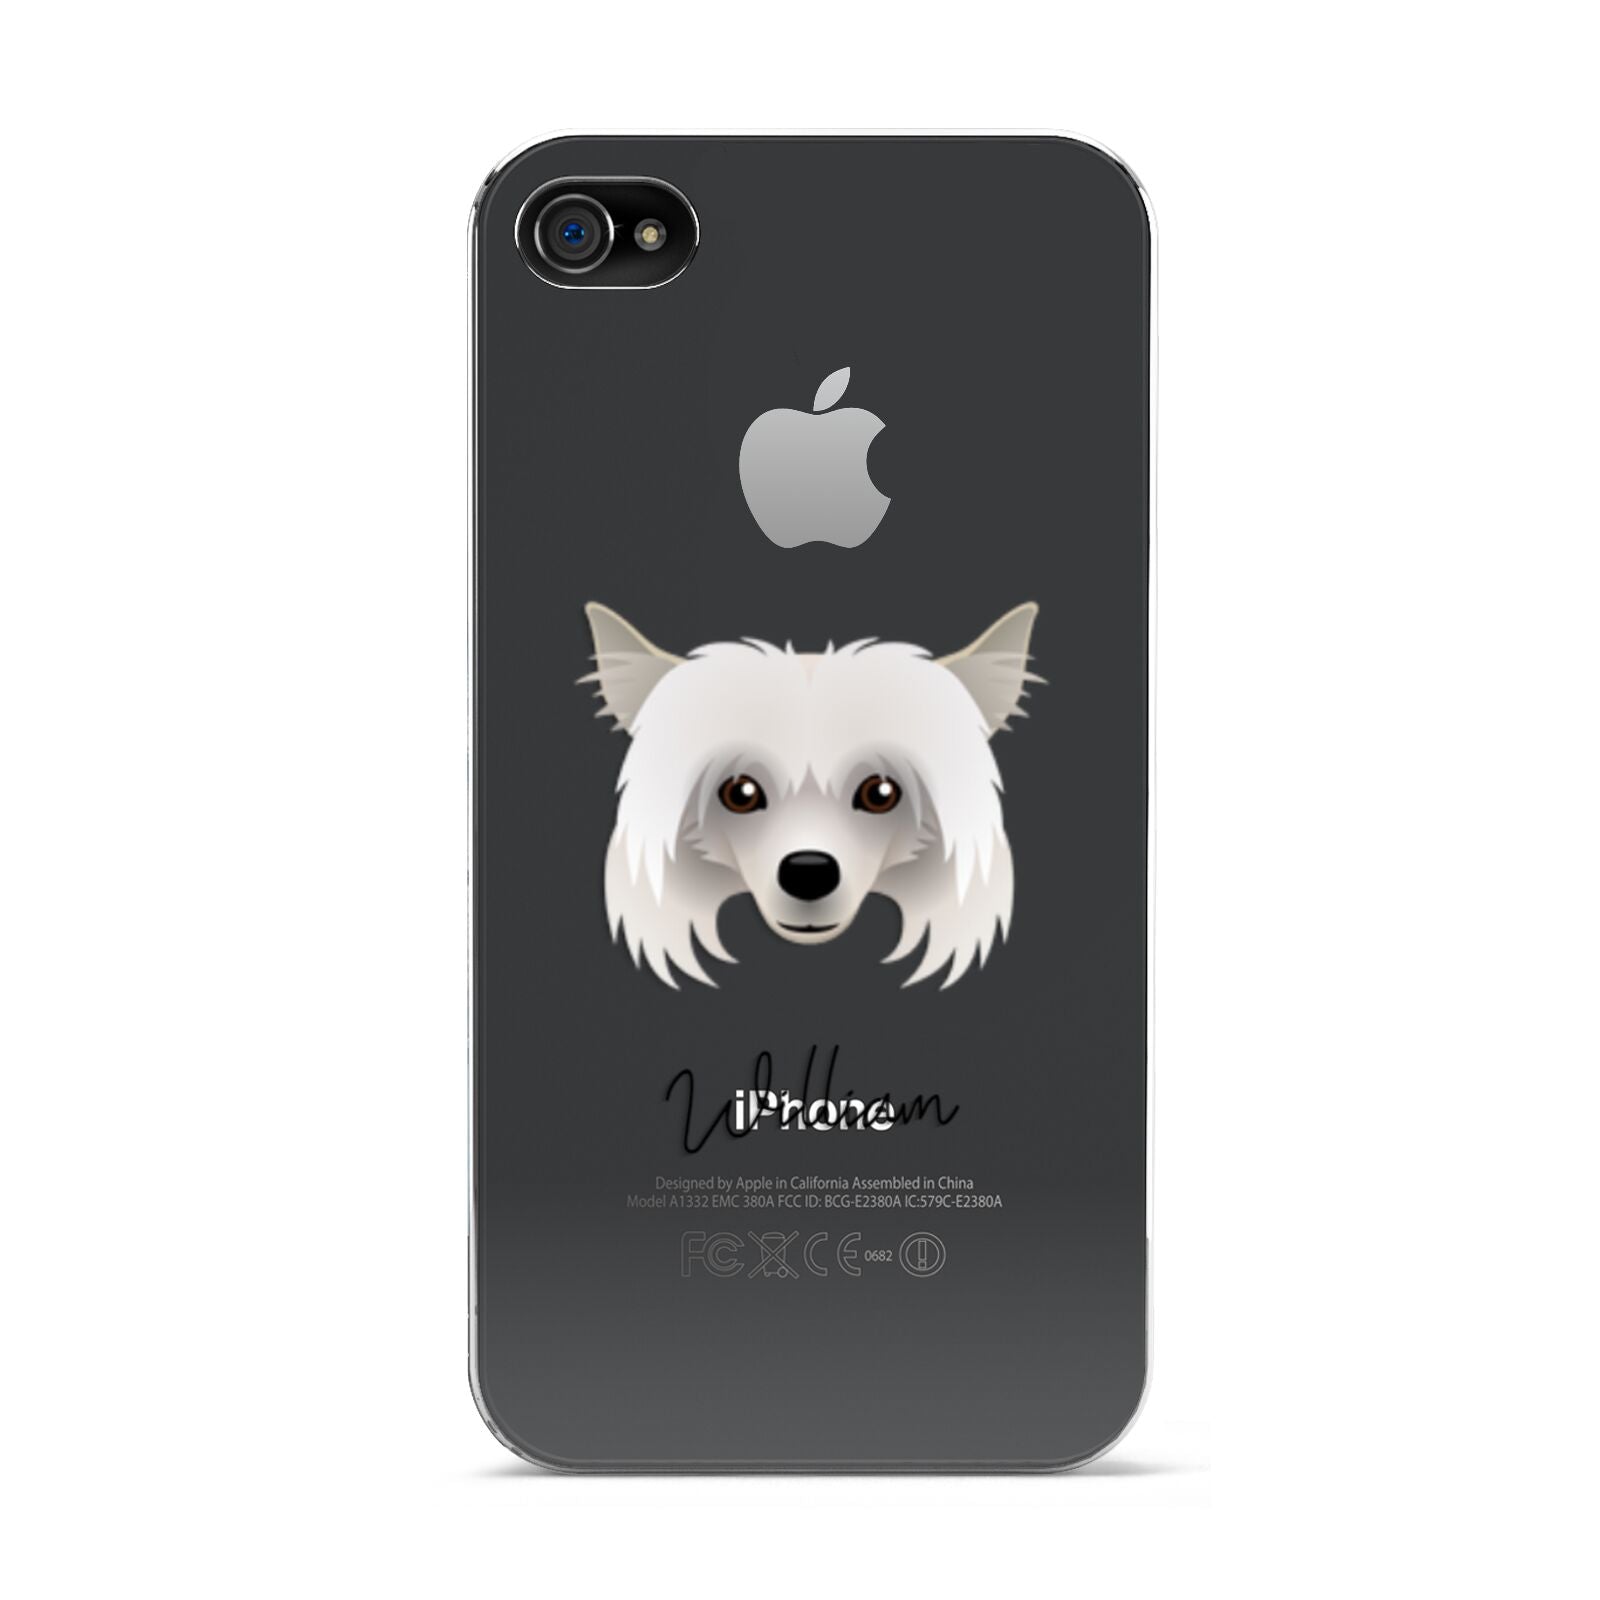 Powderpuff Chinese Crested Personalised Apple iPhone 4s Case